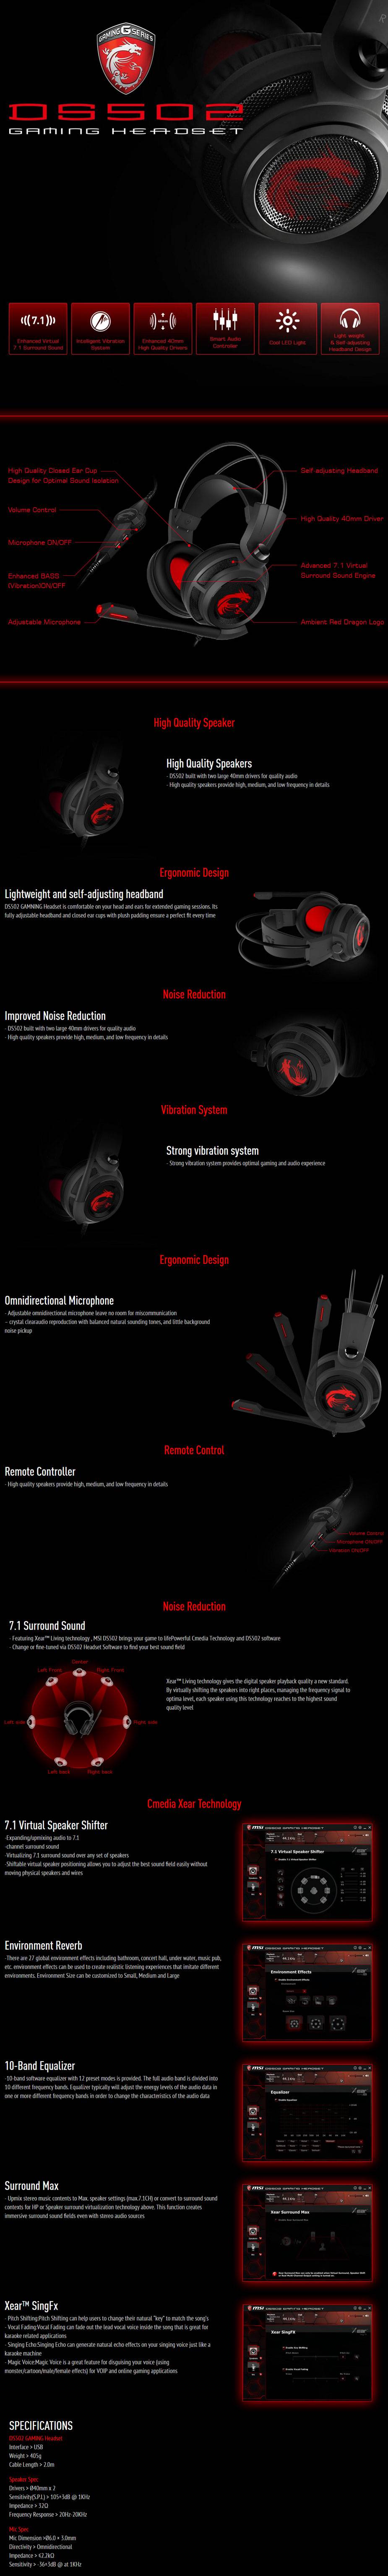 A large marketing image providing additional information about the product MSI DS502 Gaming Wired Headset - Additional alt info not provided